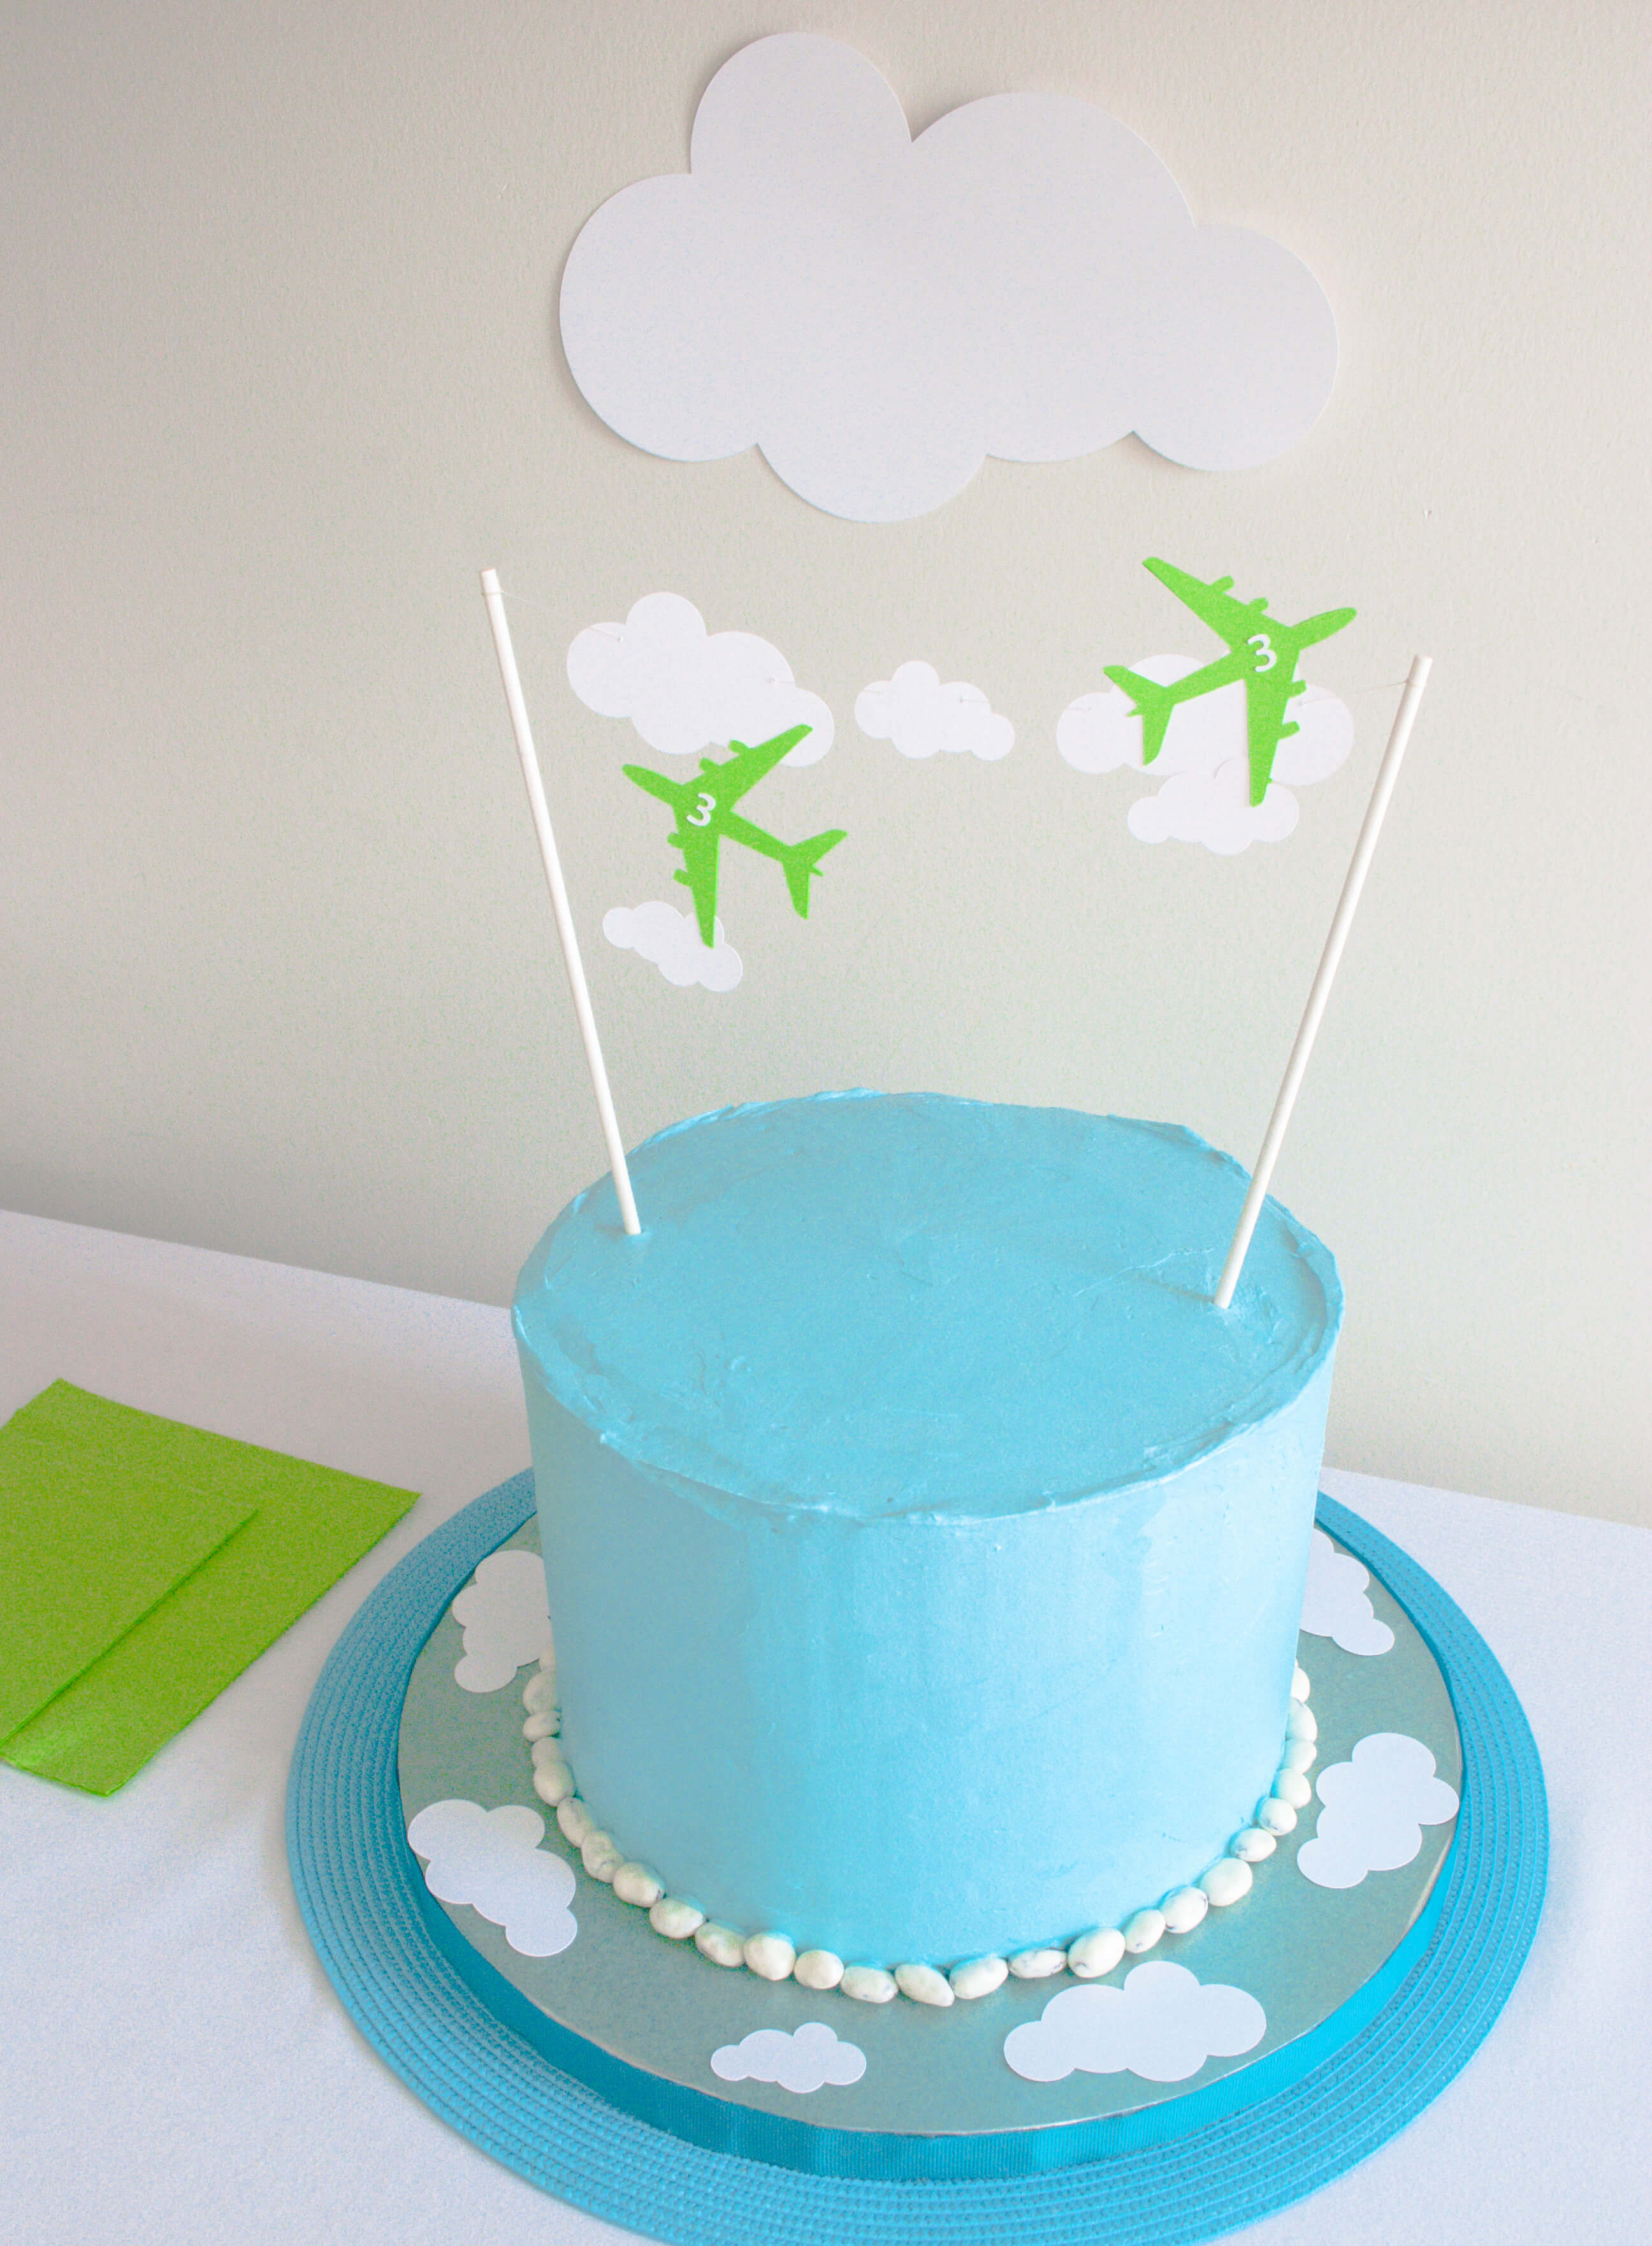 Easy Airplane Birthday Cake {plus Free Printable Airplane and Cloud Cake Toppers ...2592 x 3523